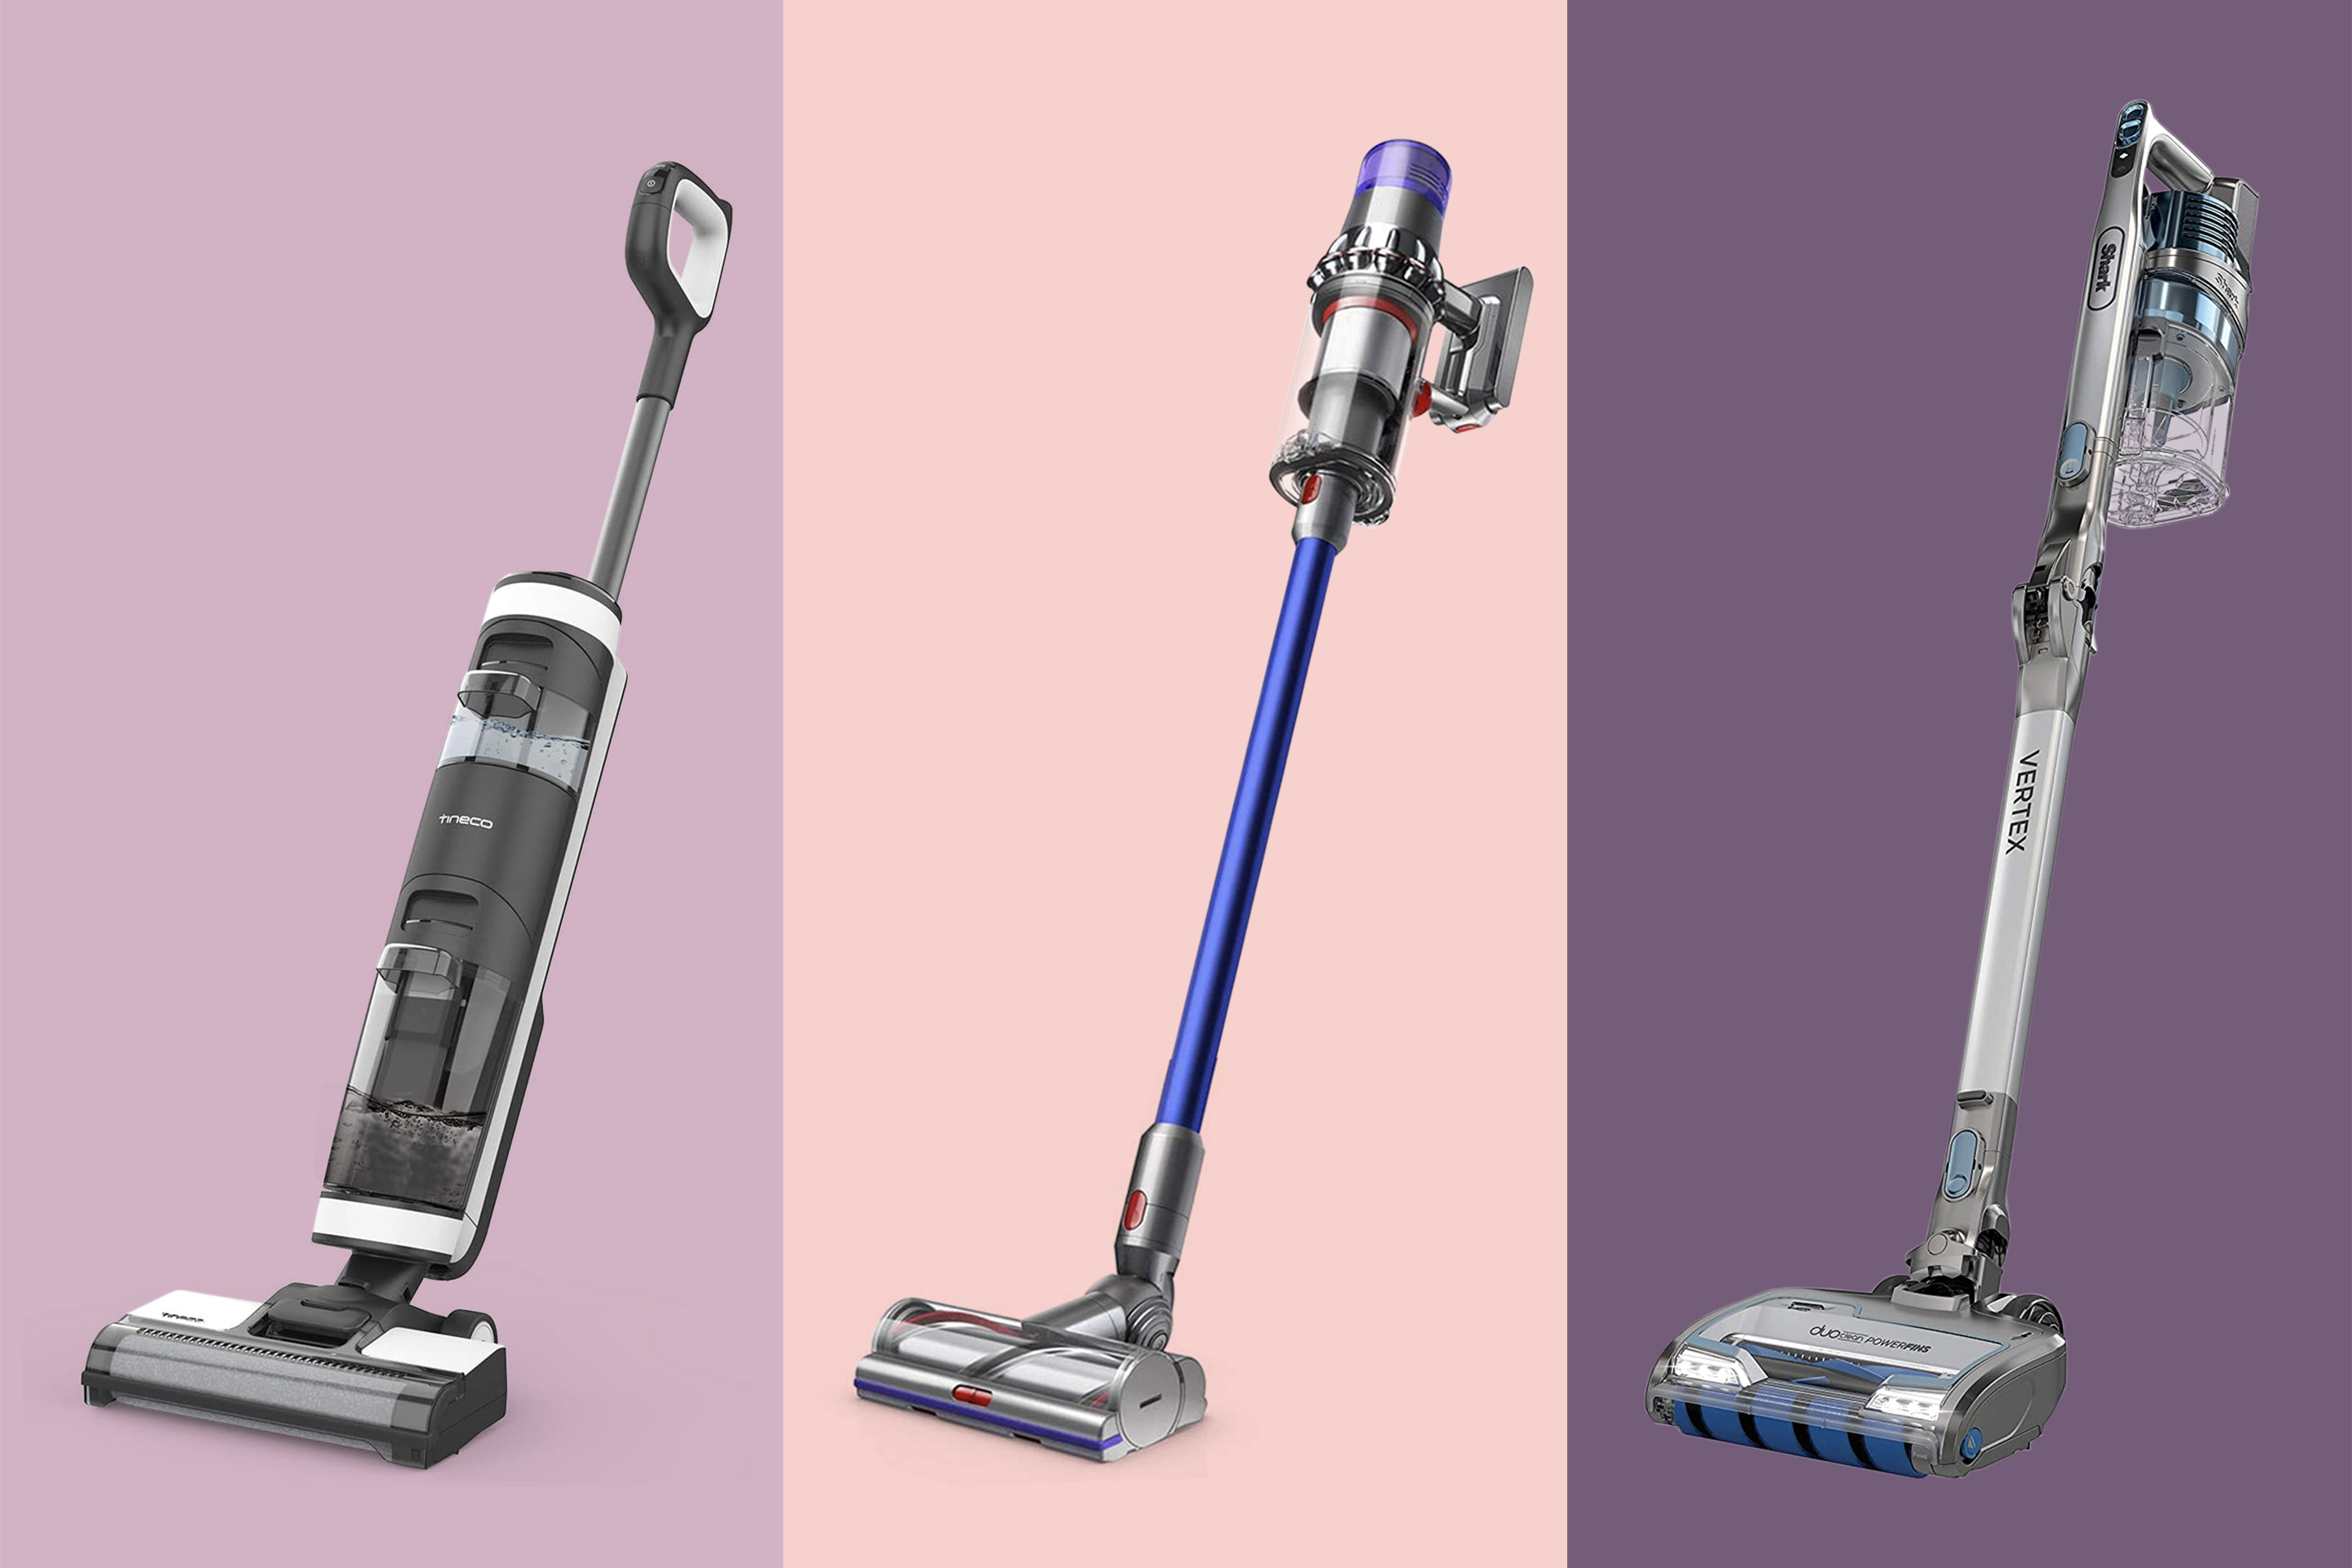 Best Cordless Vacuum Cleaner For 2021, Best Cordless Vacuum For Pet Hair And Hardwood Floors